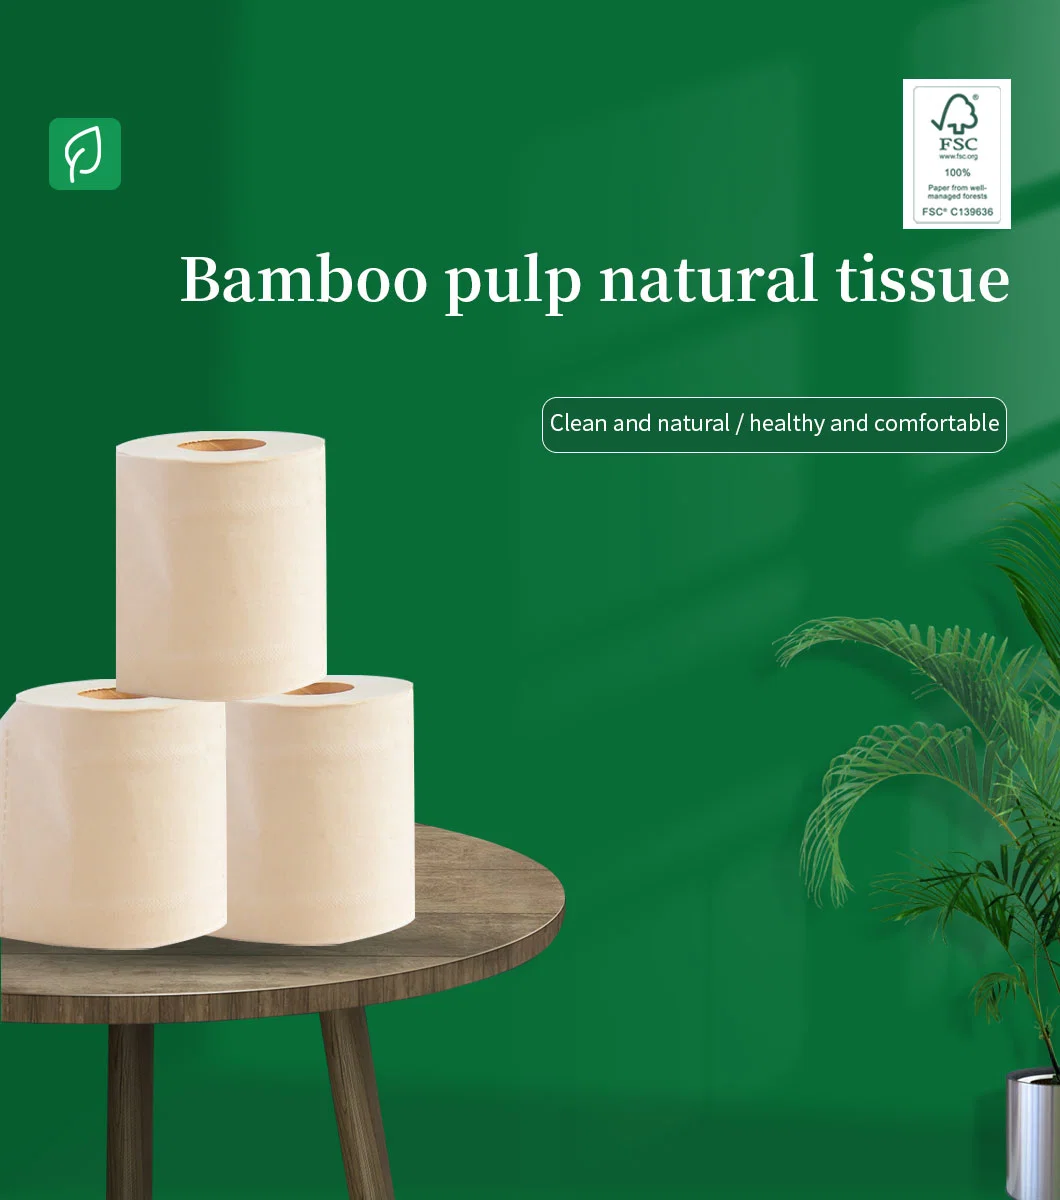 ISO Factory Small MOQ 3 Ply Toilet Paper Virgin Bamboo Paper Eco-Friendly Material Paper Tape Environmental Ink Towel Paper Roll Tissue Paper Jumbo Roll